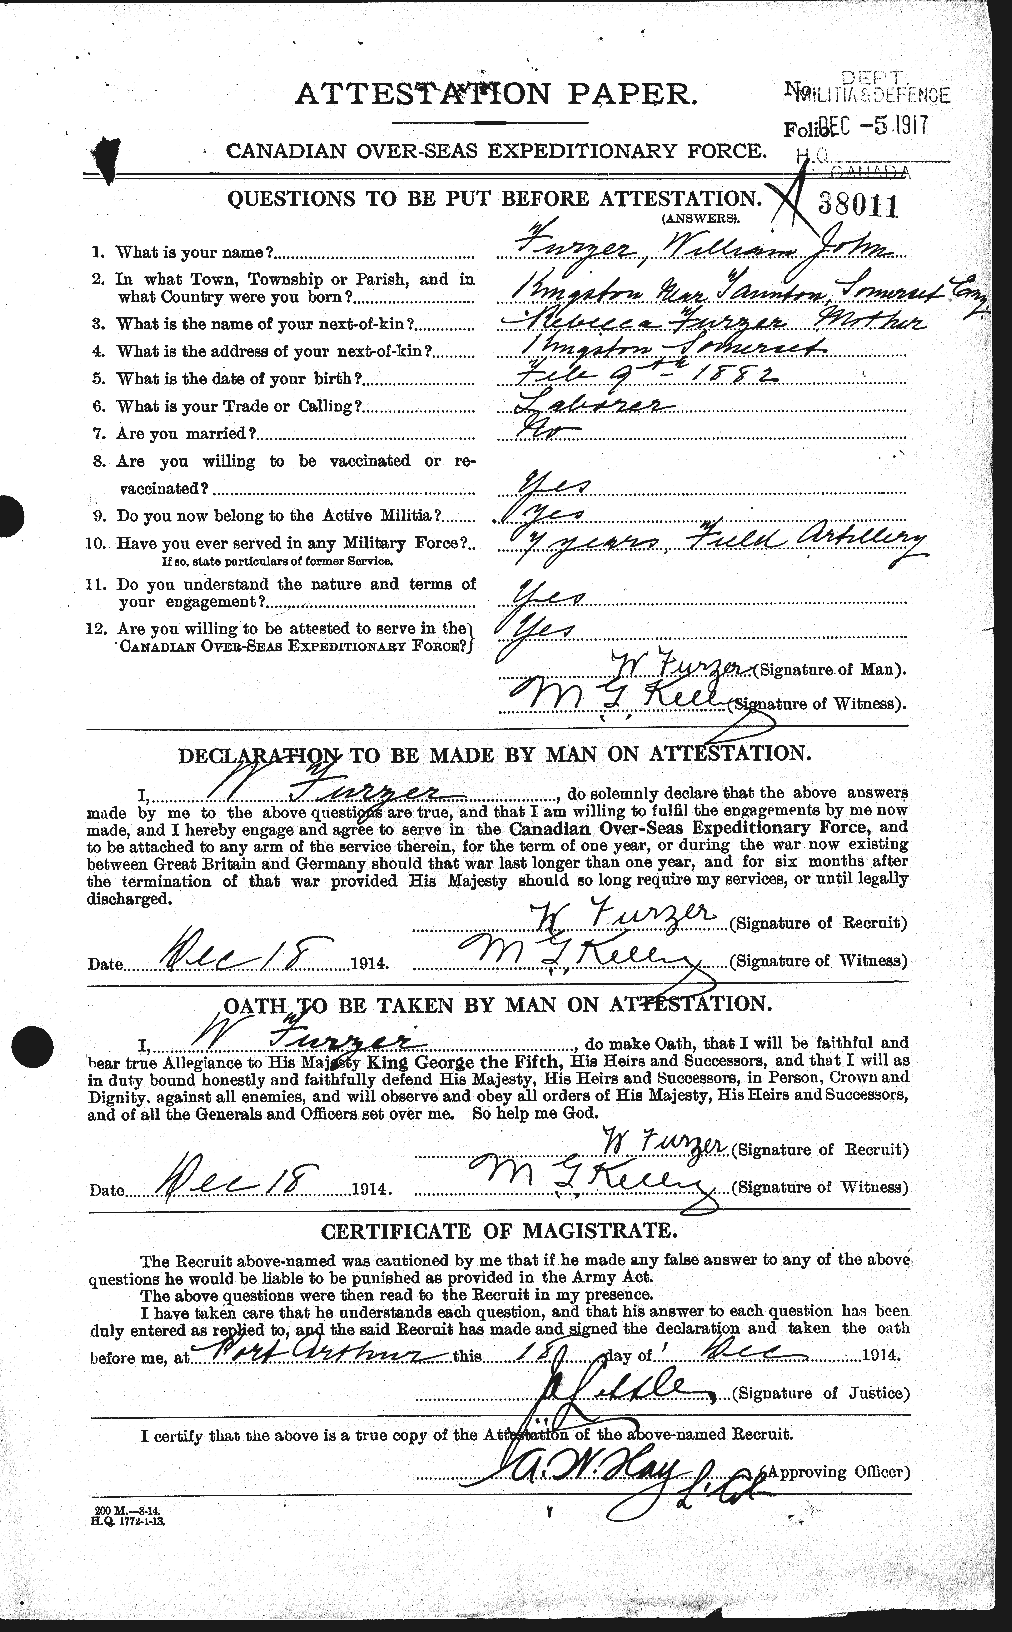 Personnel Records of the First World War - CEF 337736a